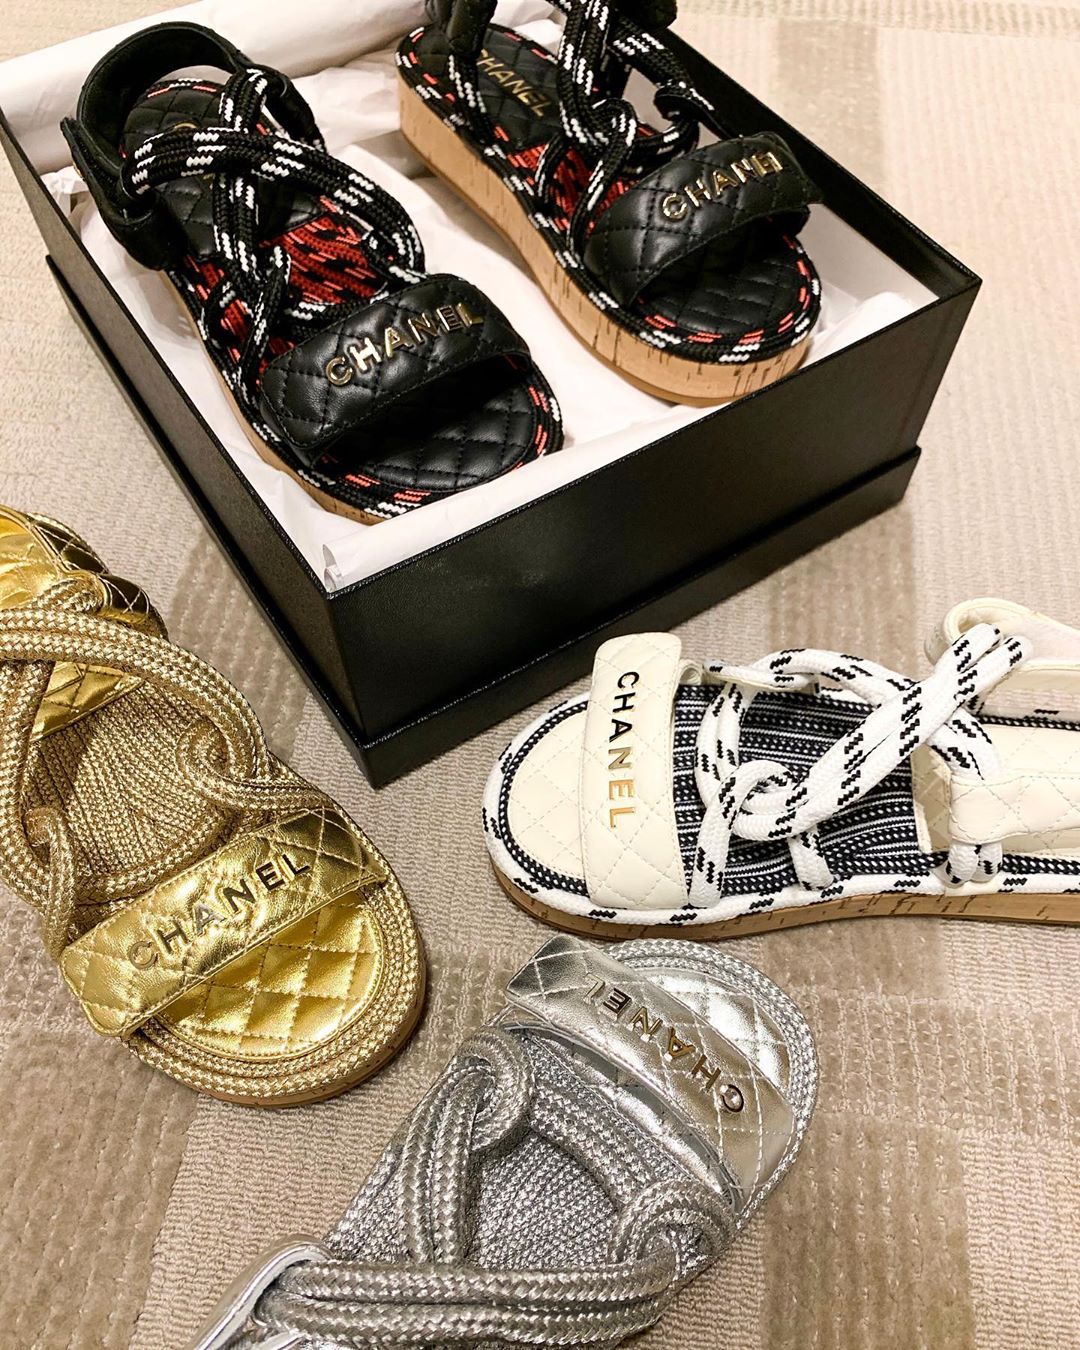 Harrods - Not every day is a beach day – but every day is, most certainly, a @chanelofficial sandals day. Are you glam gold or chic monochrome?

Find @chanelofficial in Superbrands on the First Floor....